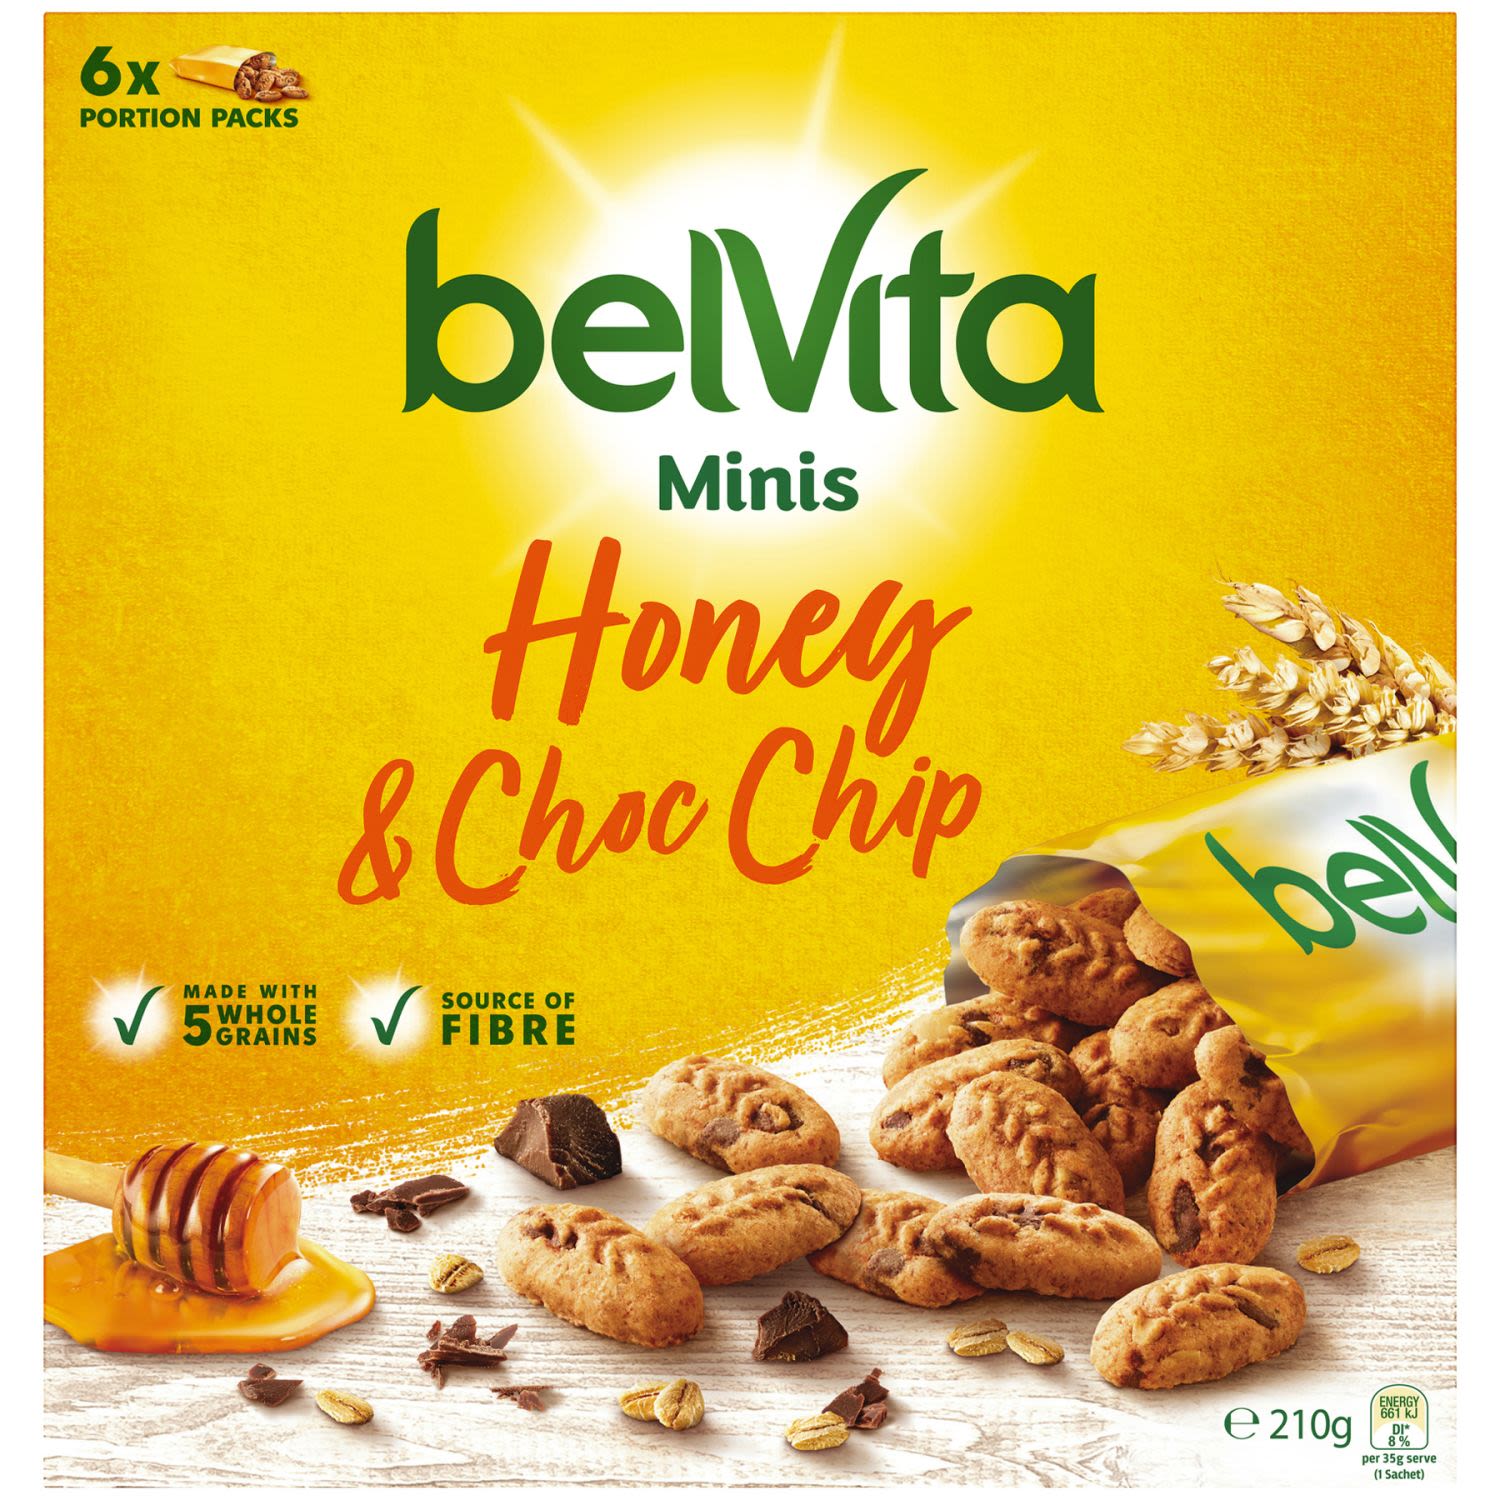 Brigthen your morning with...
belVita Minis

These delicious little biscuit bites are gently baked with 5 wholegrains providing you with a source of fibre with no artificial colours or flavours. 
Blended together with great tasting ingredients like honey & chocolate chips making them the feel-good, taste-good, mid-morning snack you're looking for enabling you to be the best you. Always.
<br /> <br />